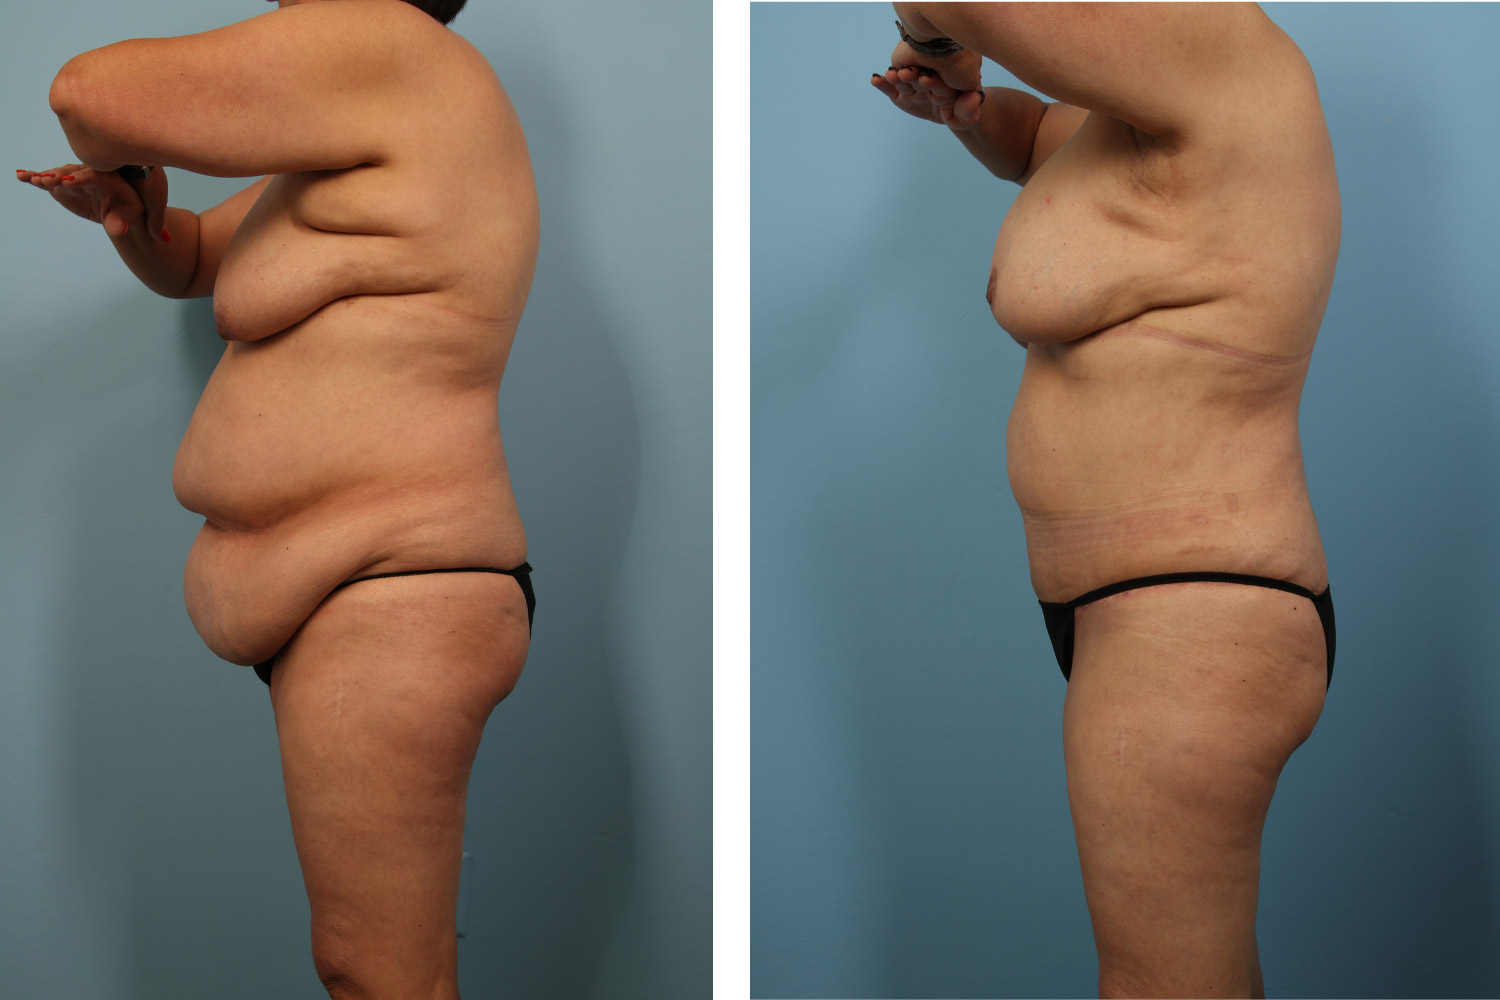 Mommy makeover on a 60-year-old woman including tummy tuck, liposuction, and breast augmentation